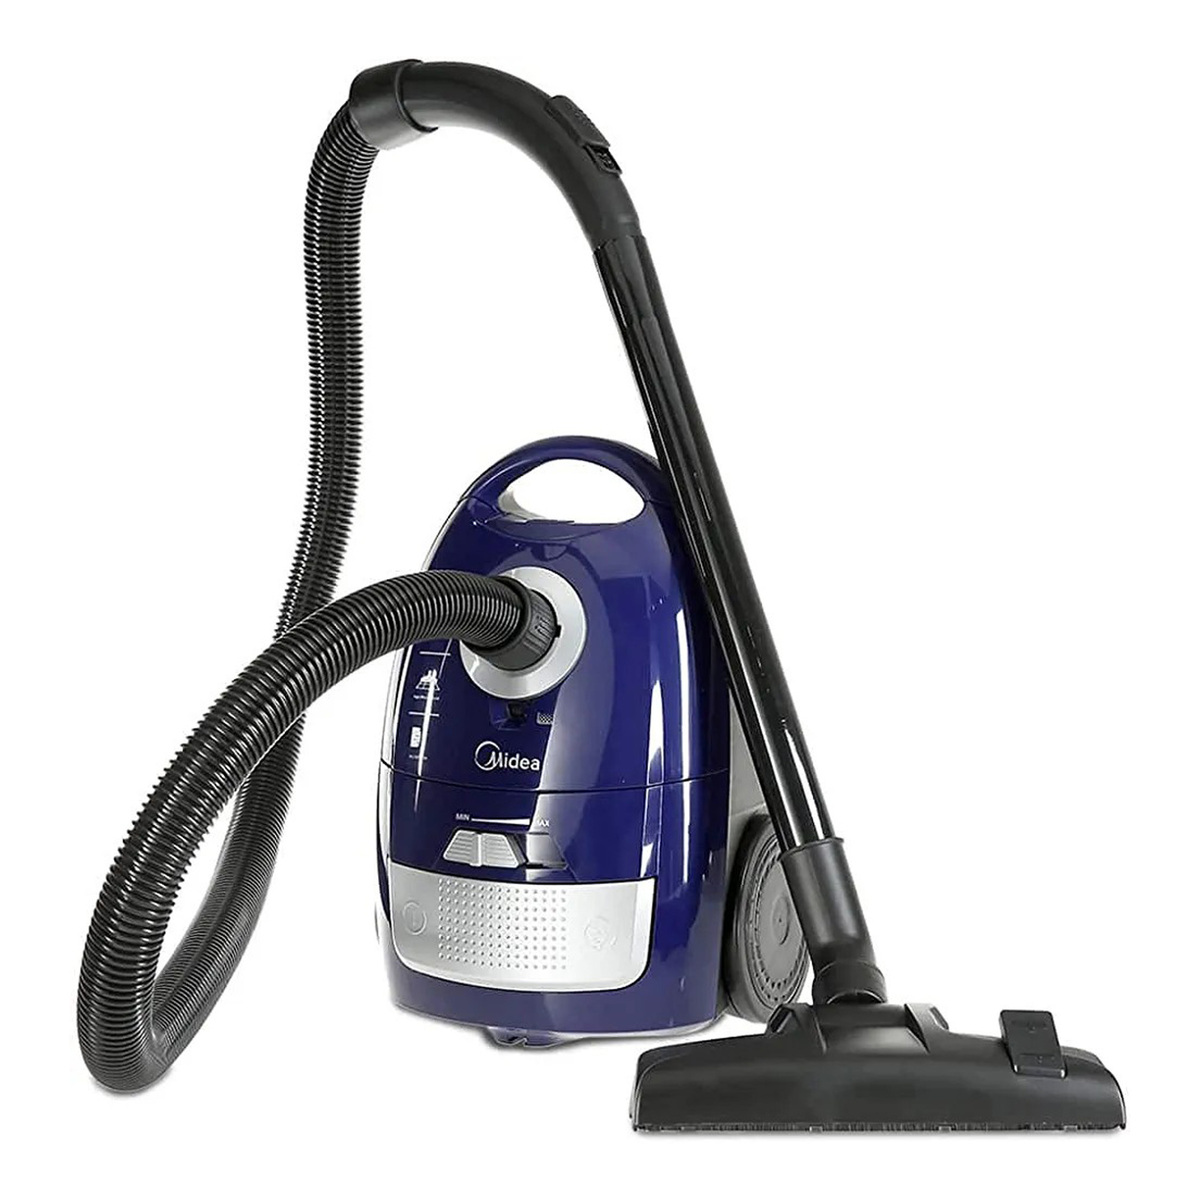 Midea Canister Vacuum Cleaner, 1600 W, Blue, VCB37A14C